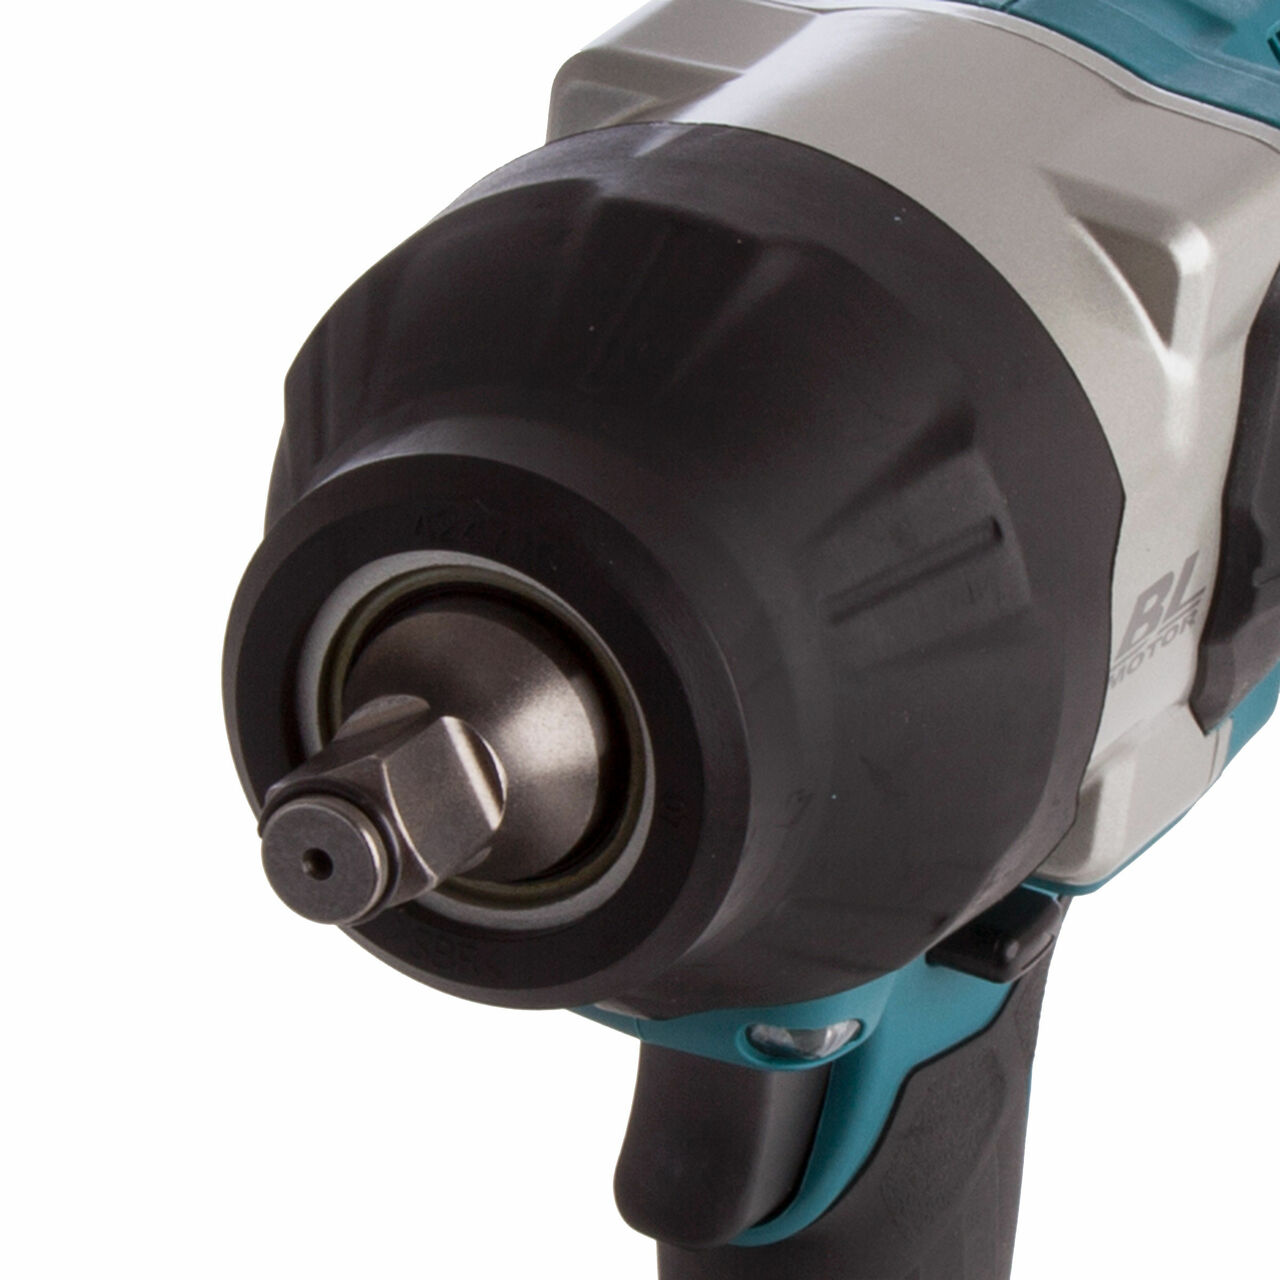 Makita 18v 1/2" 1000nm Impact Wrench (body only) MAKDTW1002Z | The 3 stage impact power selection gives this tool versability for different jobs around the workplace. | toolforce.ie